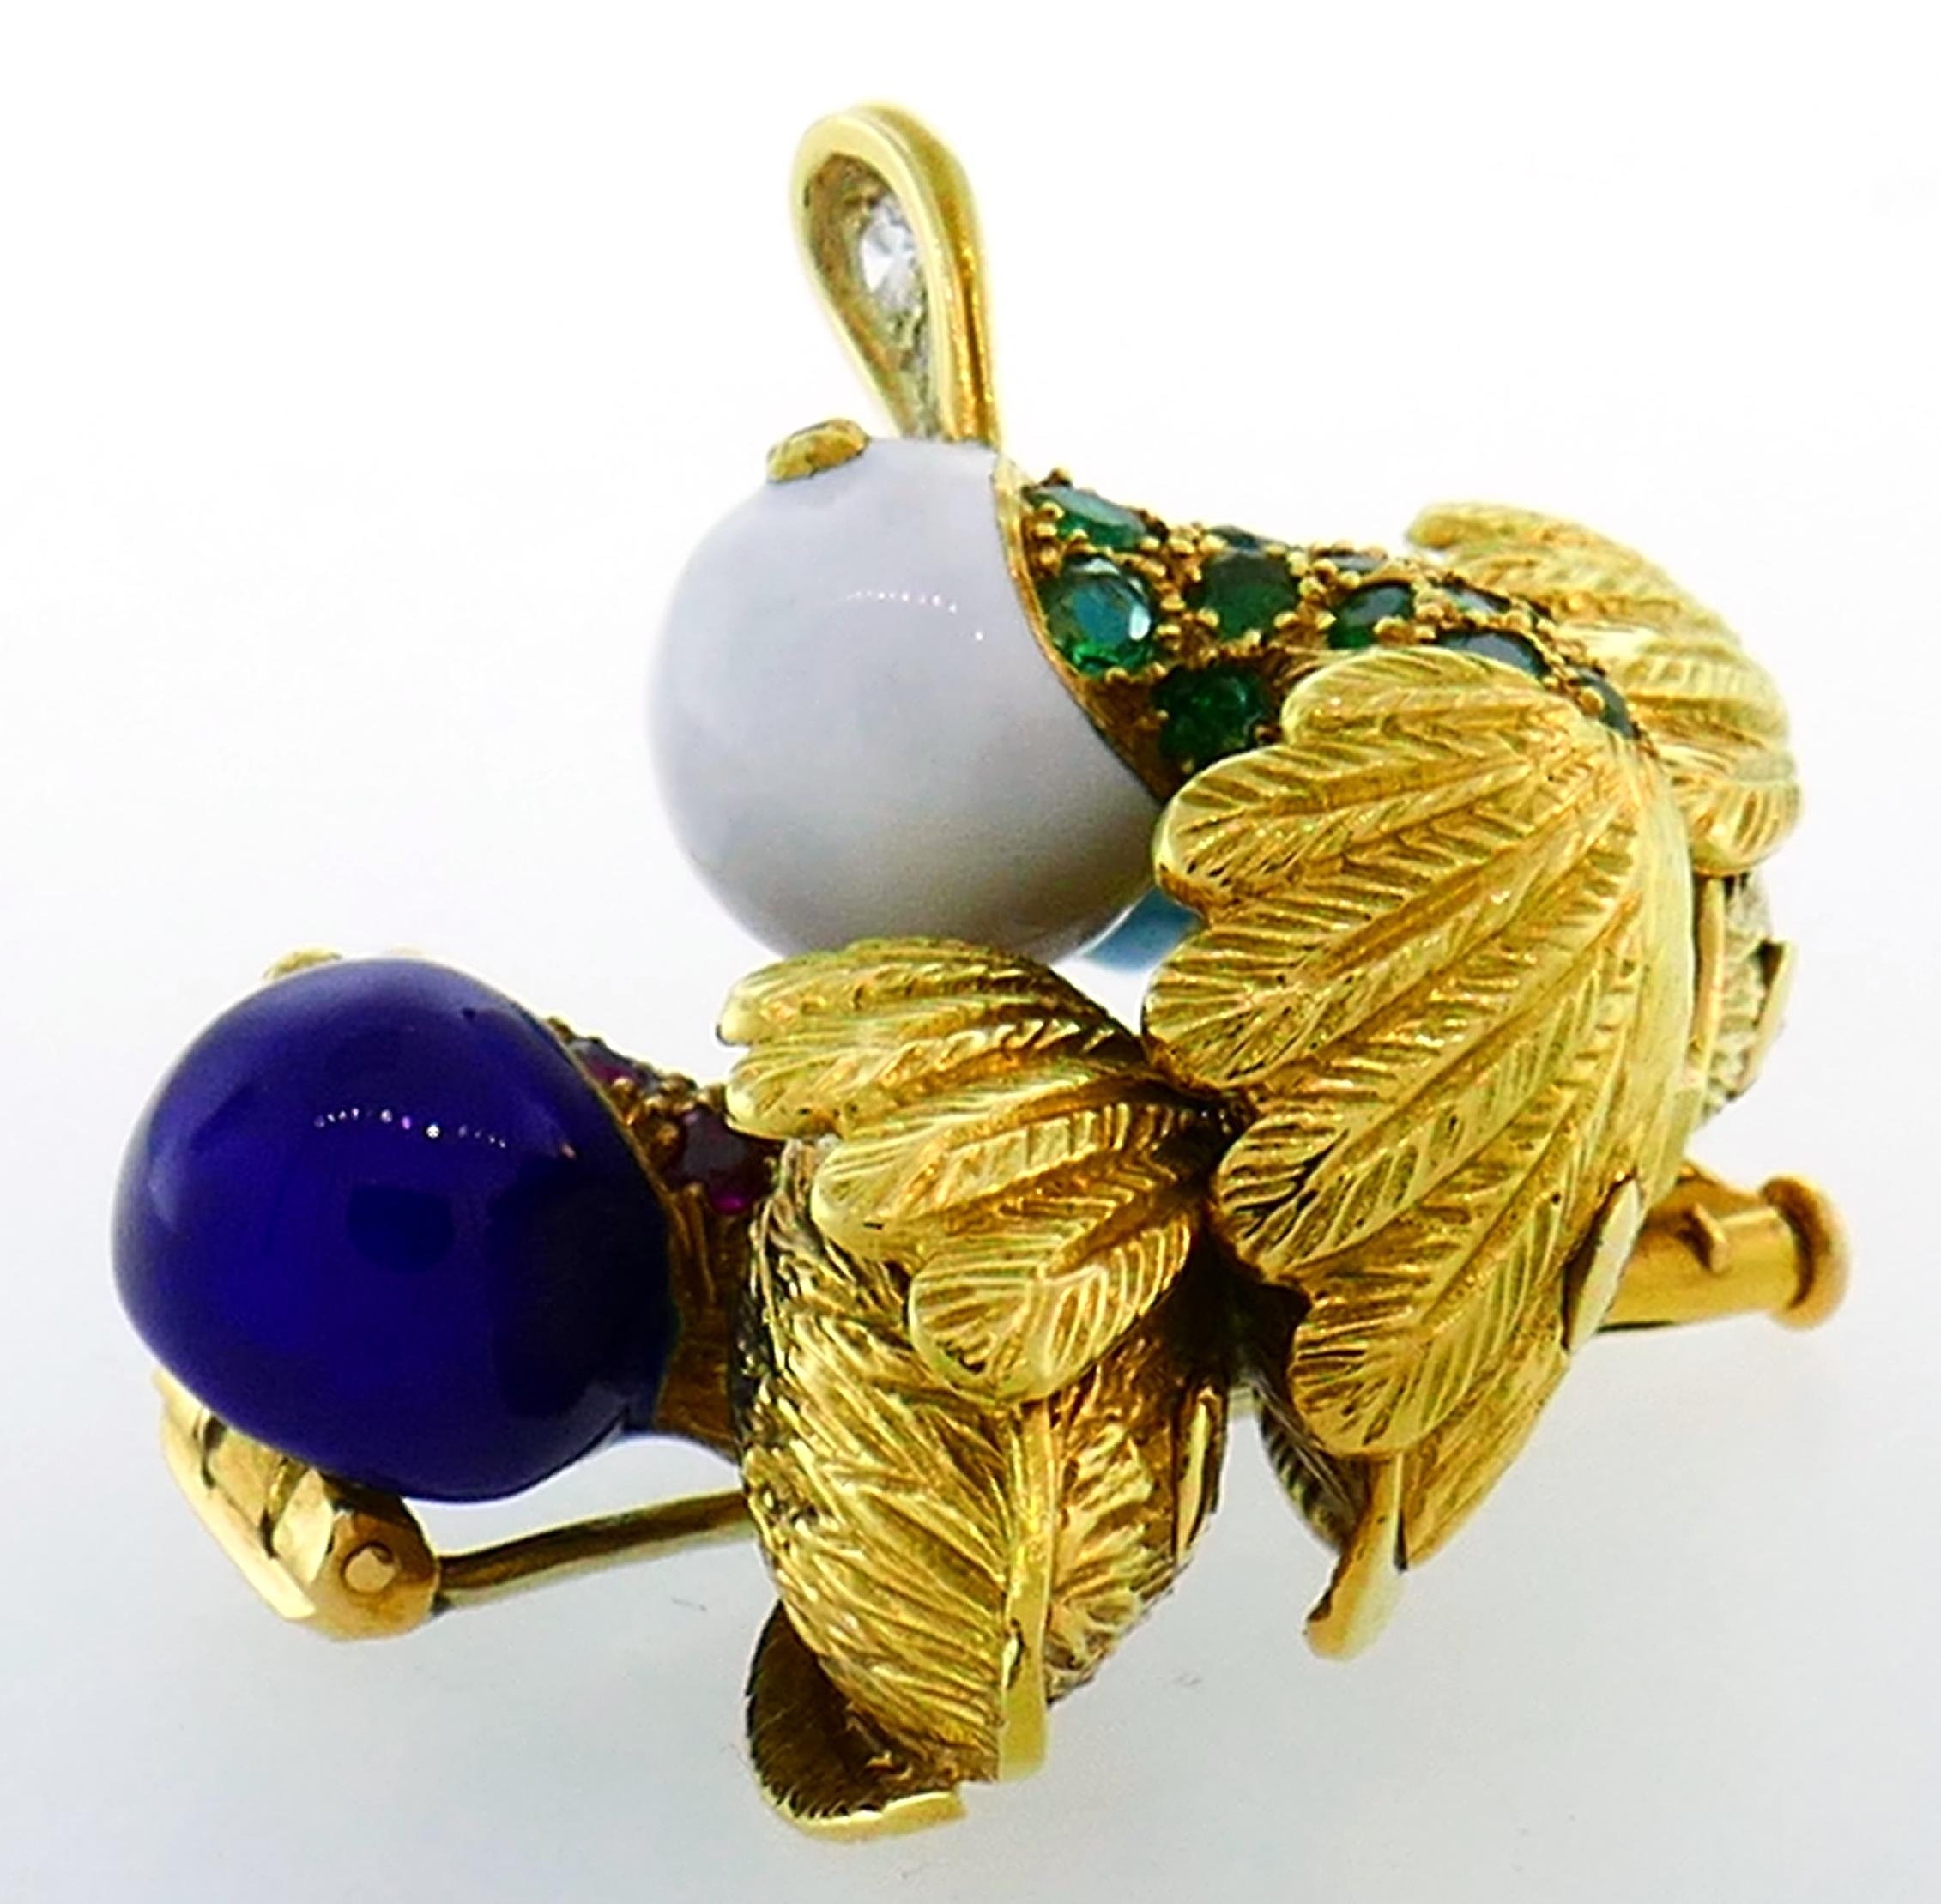 French Vintage Brooch 18k Gold Enamel Gems Duck Pin Clip Estate Jewelry In Excellent Condition For Sale In Beverly Hills, CA